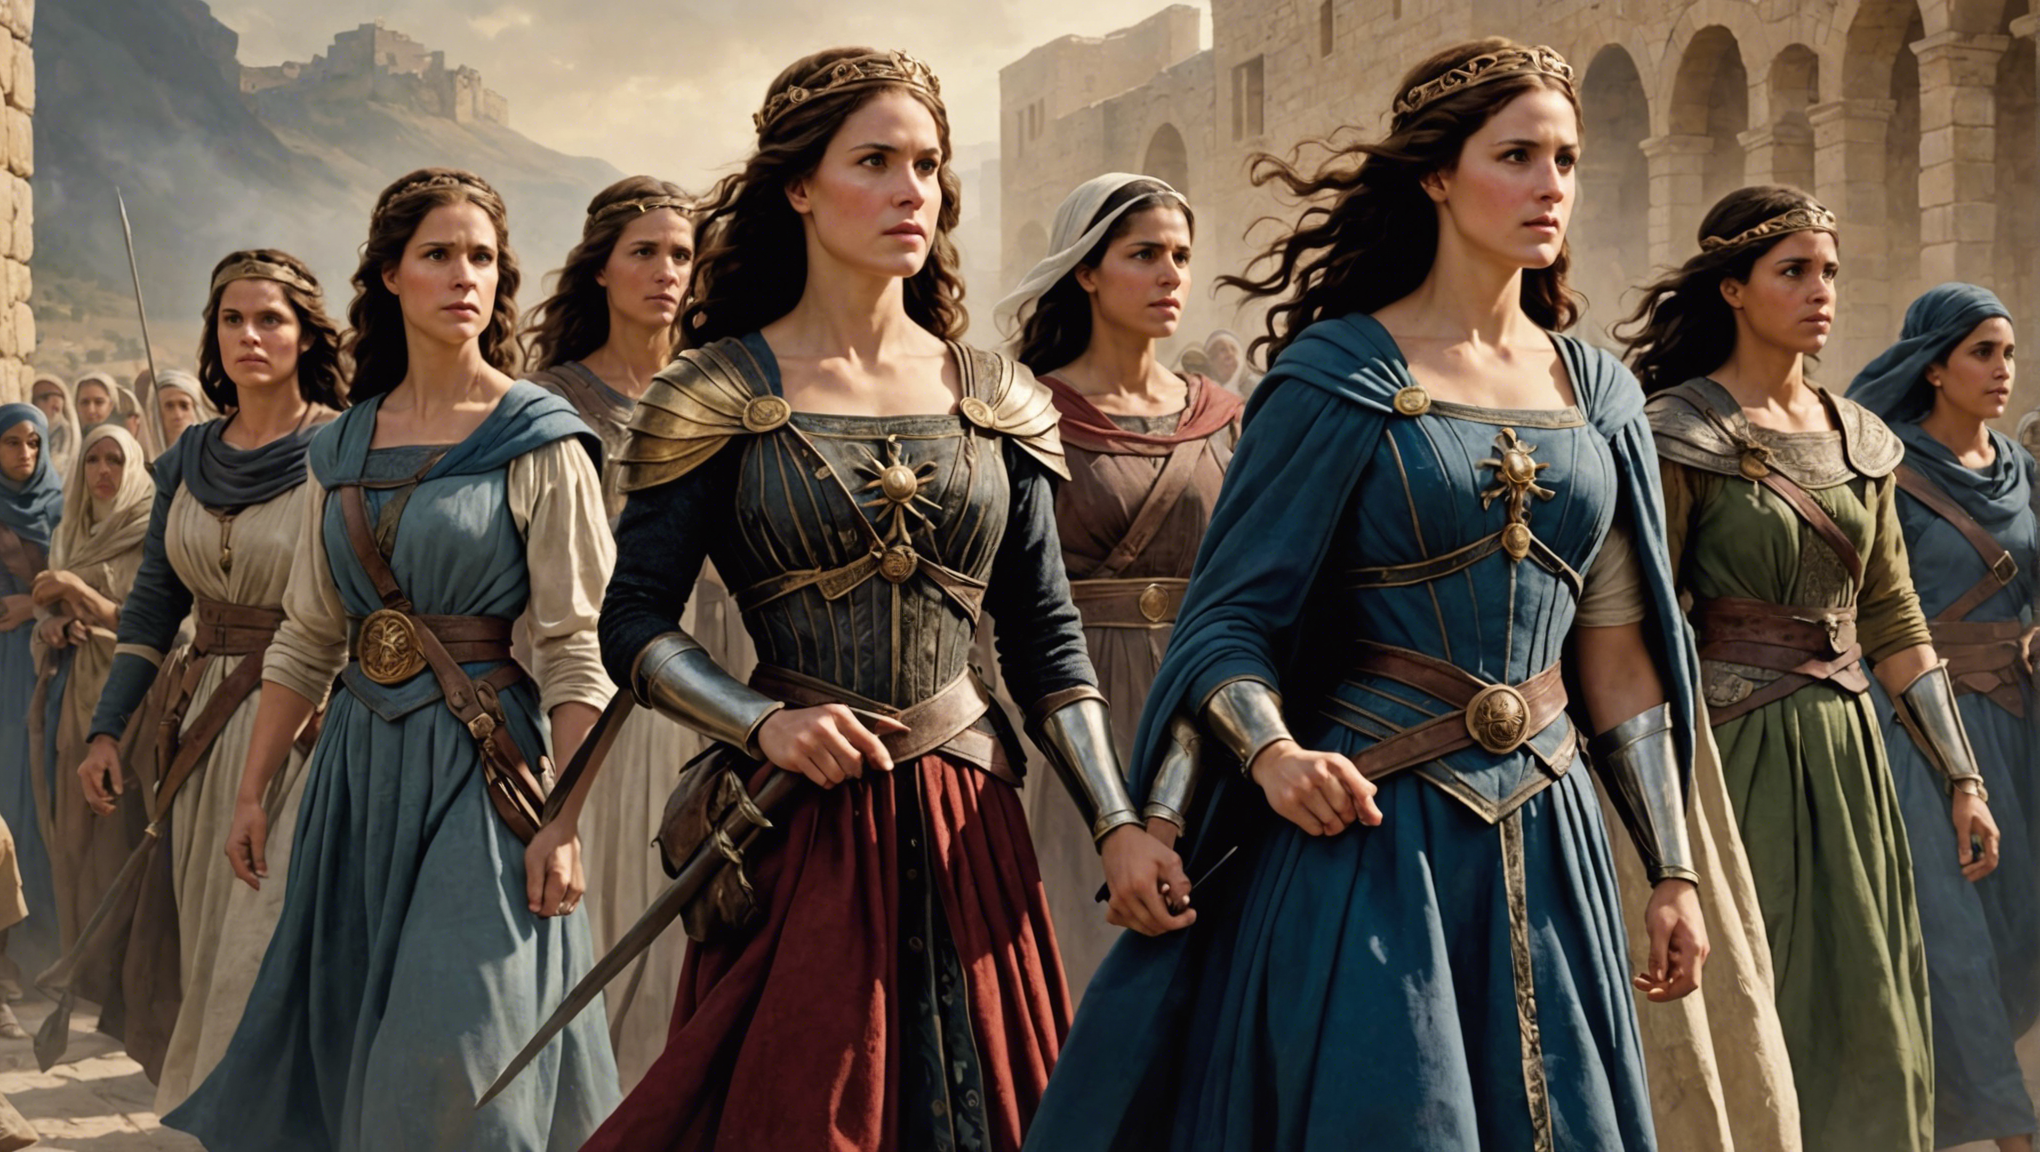 discover the stories of strength and courage of the women described as women of valor in the bible, and how their actions continue to inspire and empower women throughout history.